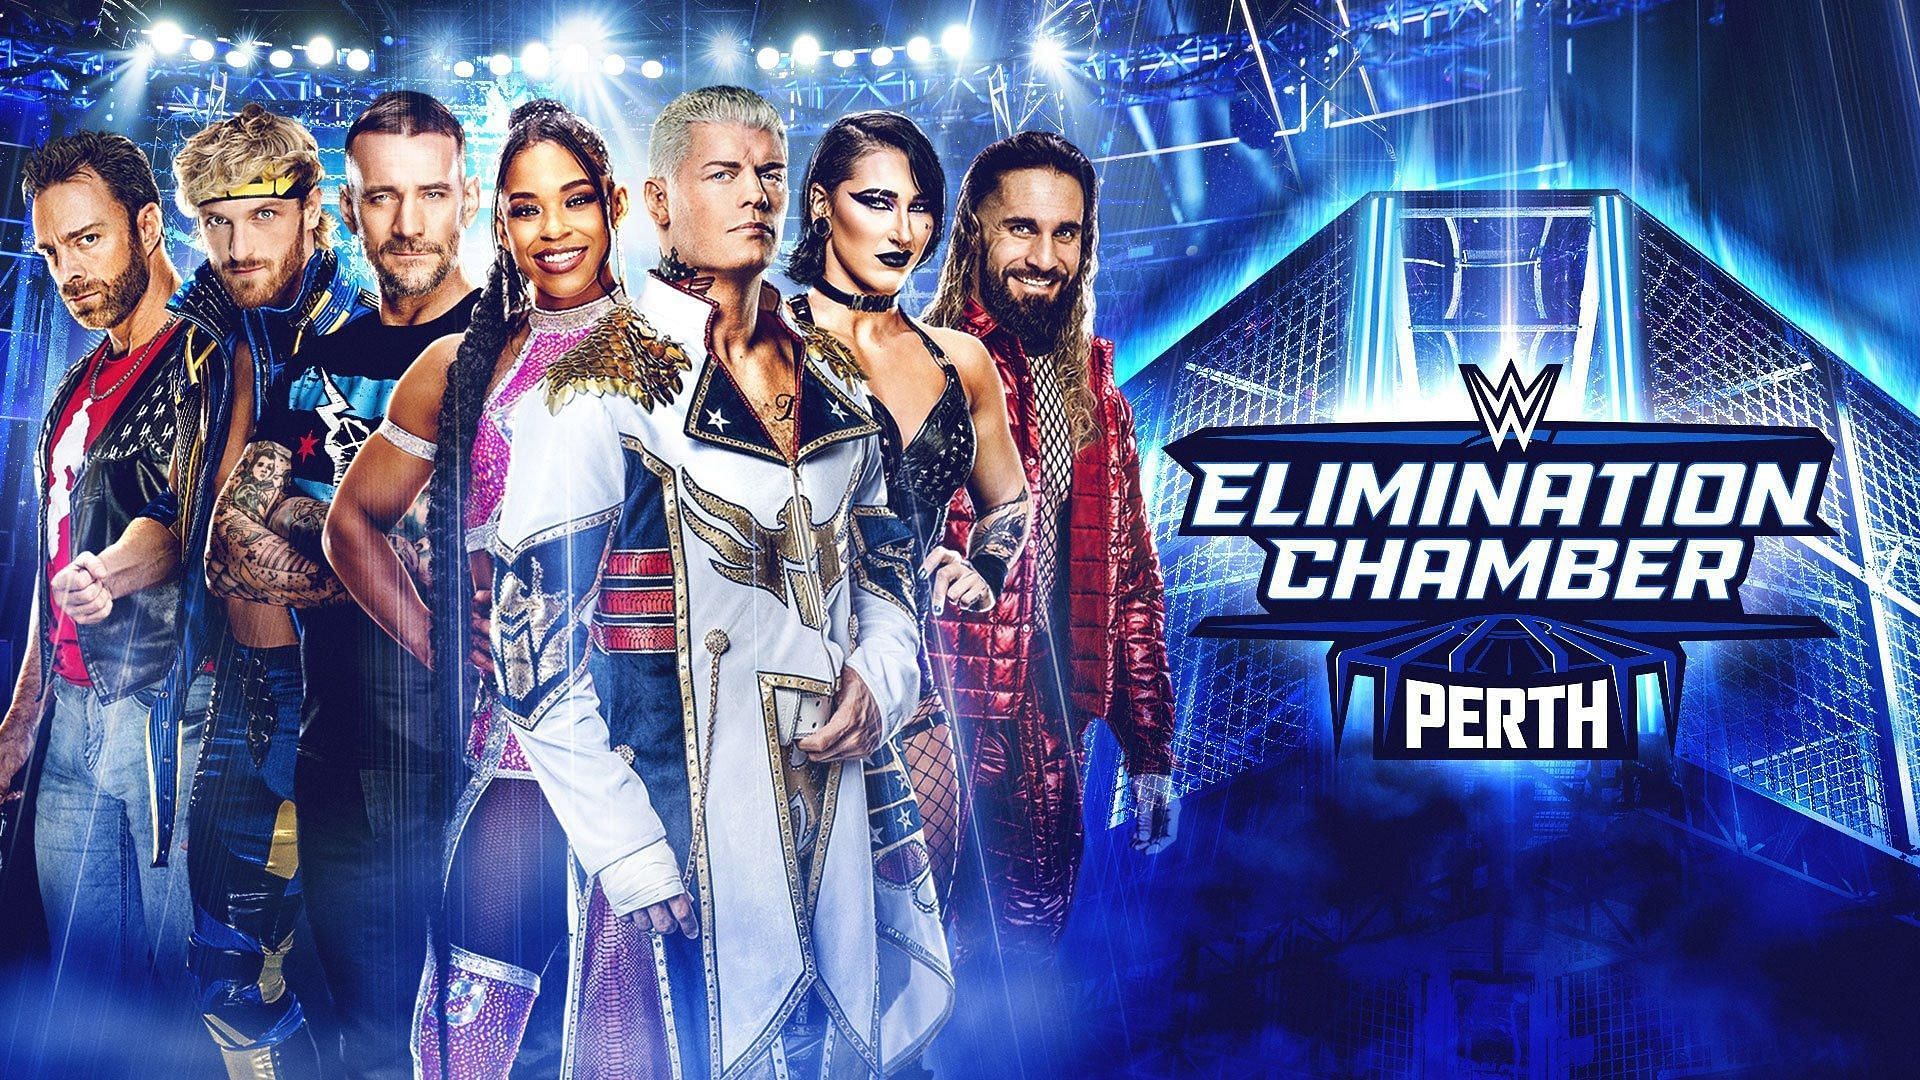 What matches are you hoping to see at Elimination Chamber in Perth?